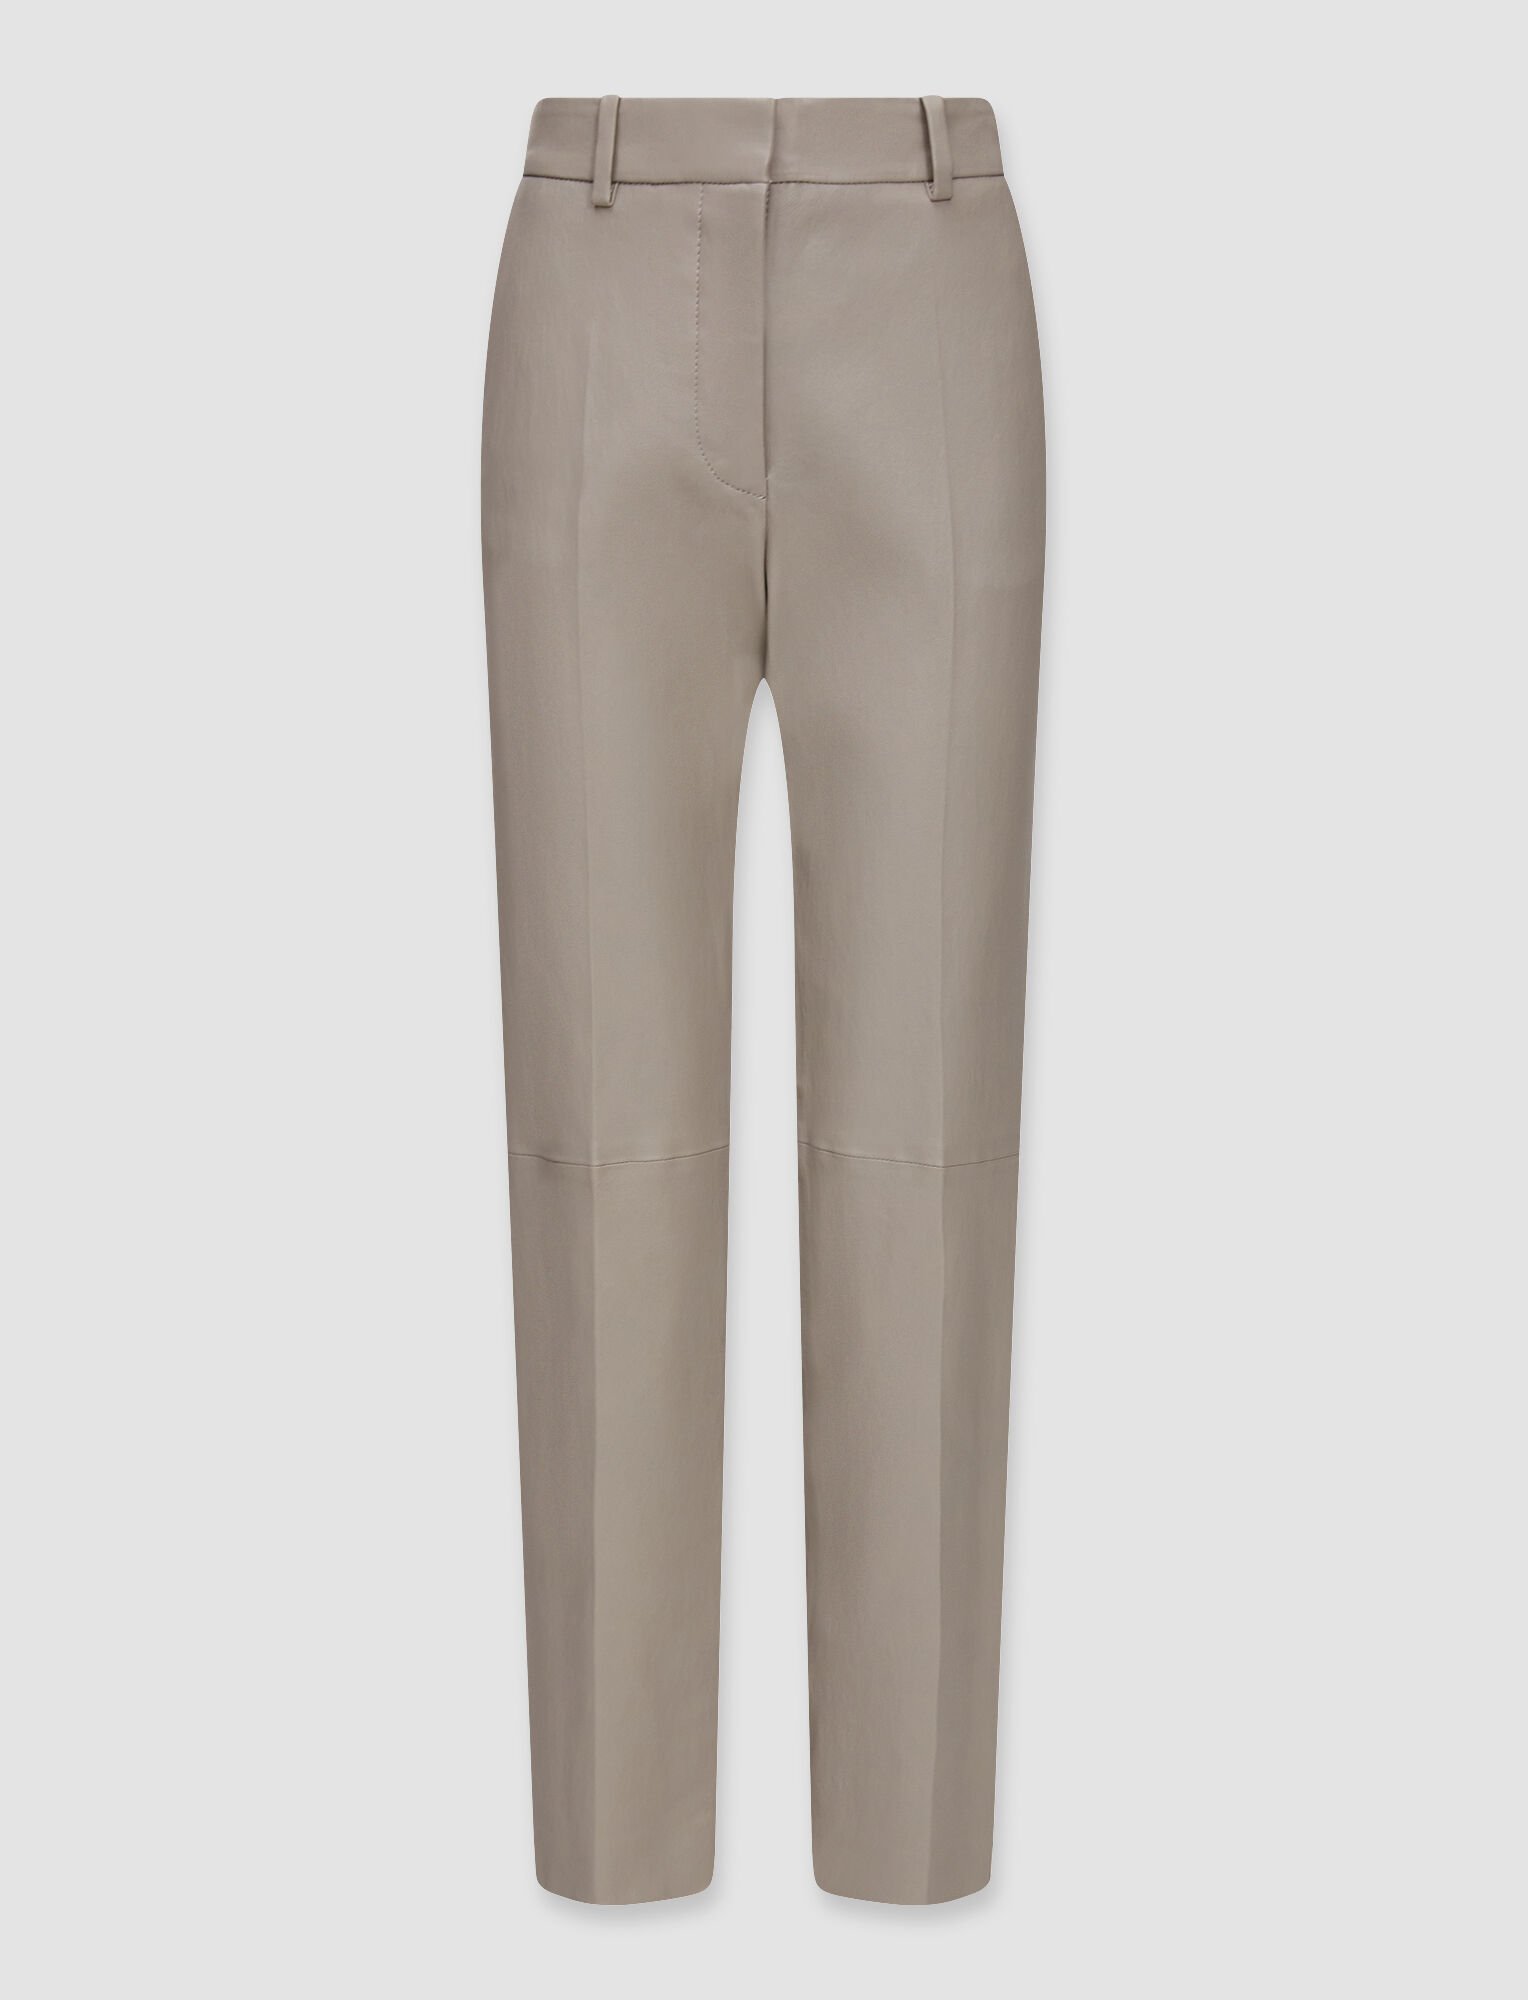 Joseph, Leather Stretch Coleman Trousers, in Cobble Stone